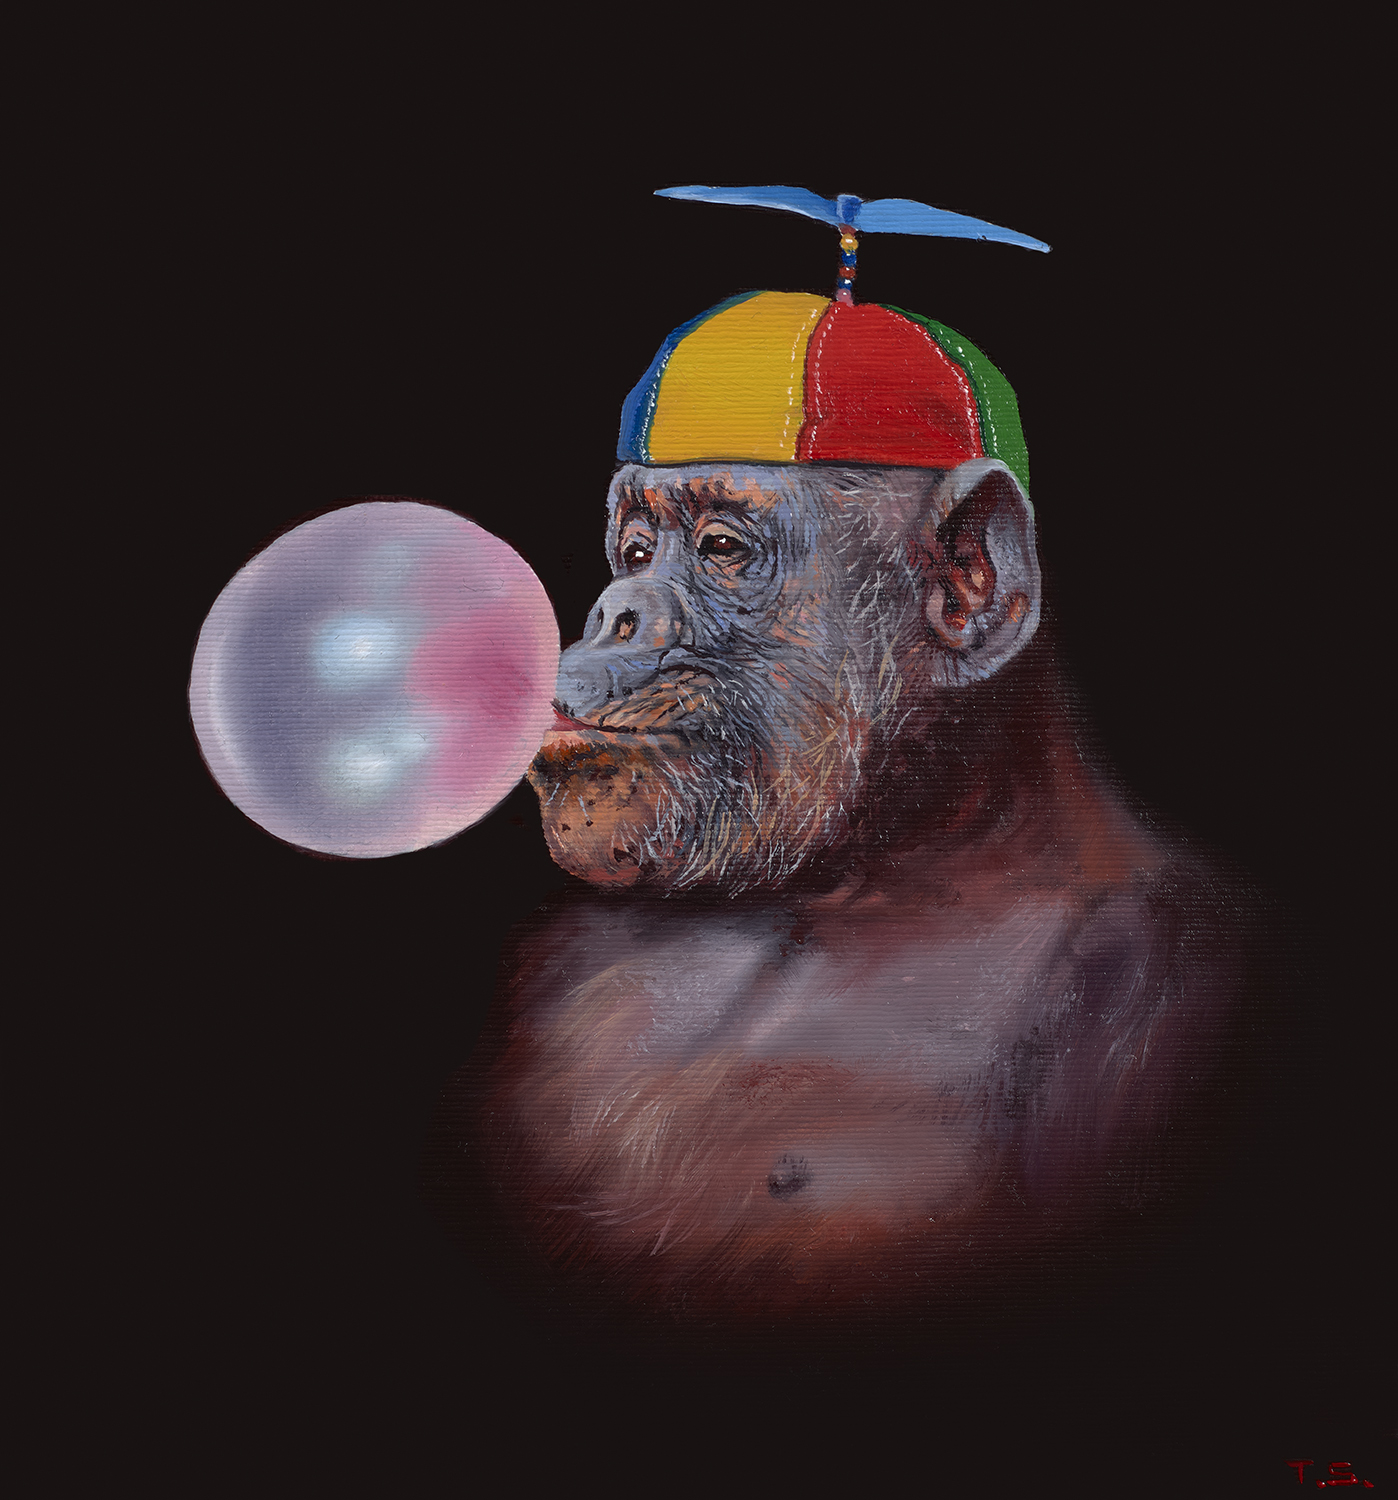 A monkey blowing a bubble - Tony South - Inflate